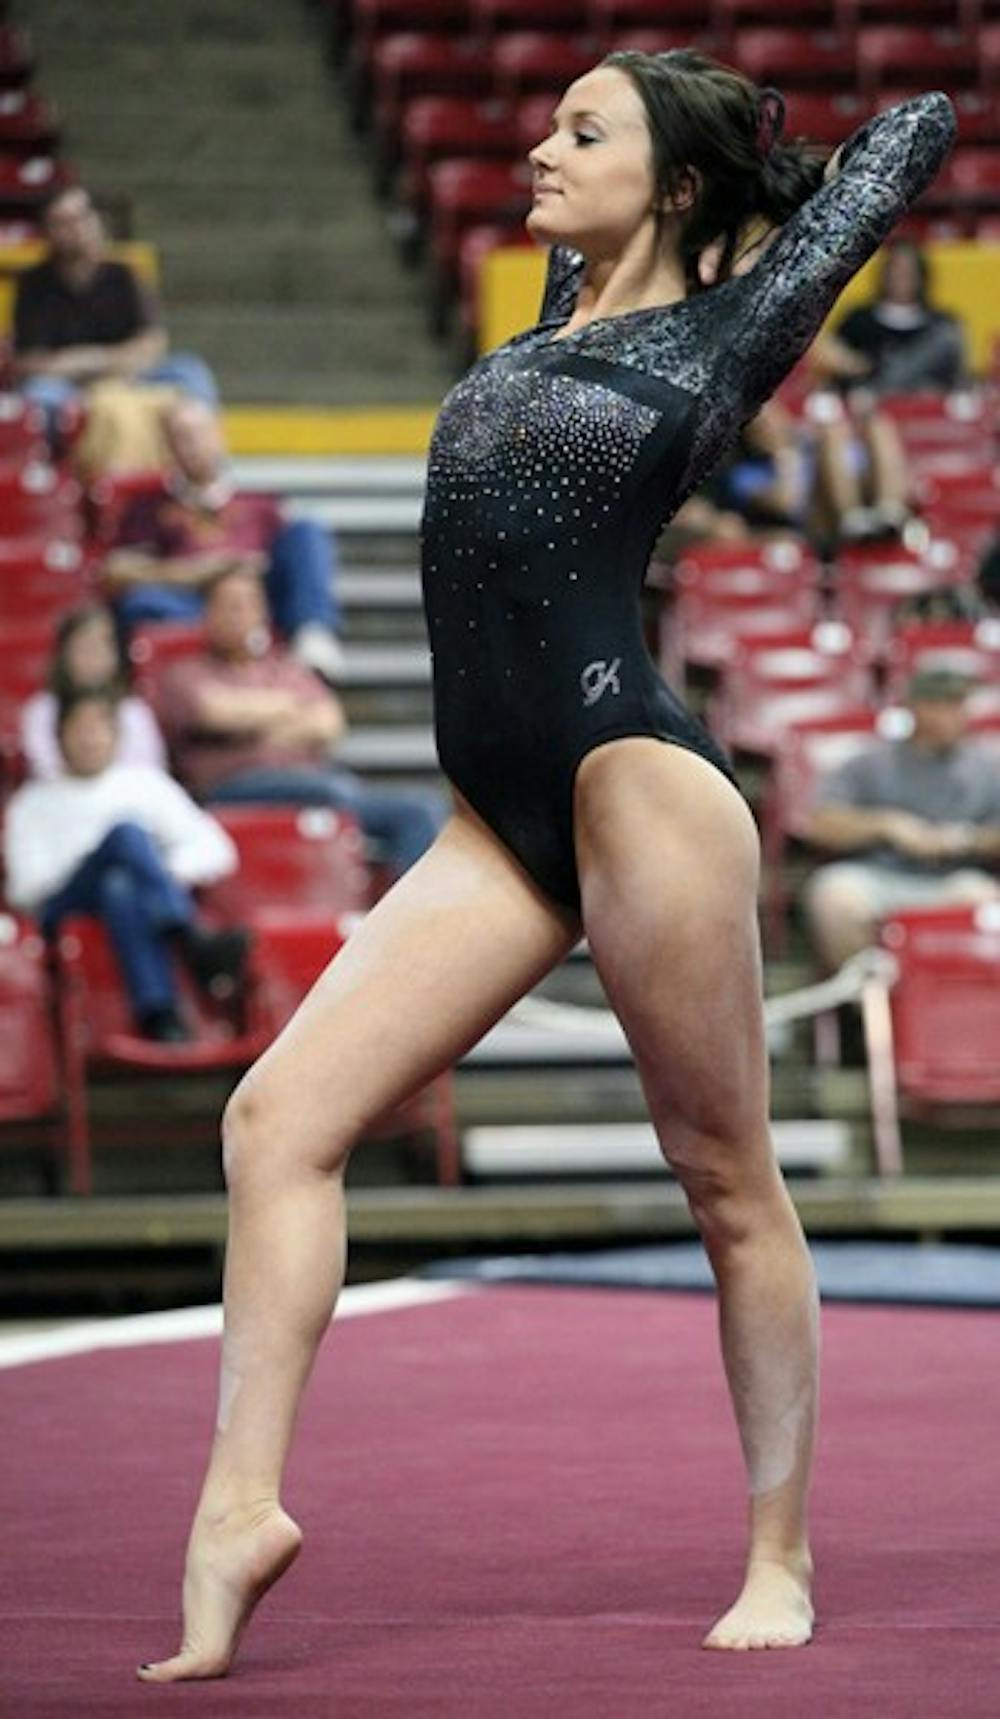 Brianna Gades performs a floor routine in a meet against Utah on Feb. 12. Gades and the Sun Devils are the most improved team in the country from last season. (Photo by Beth Easterbrook)